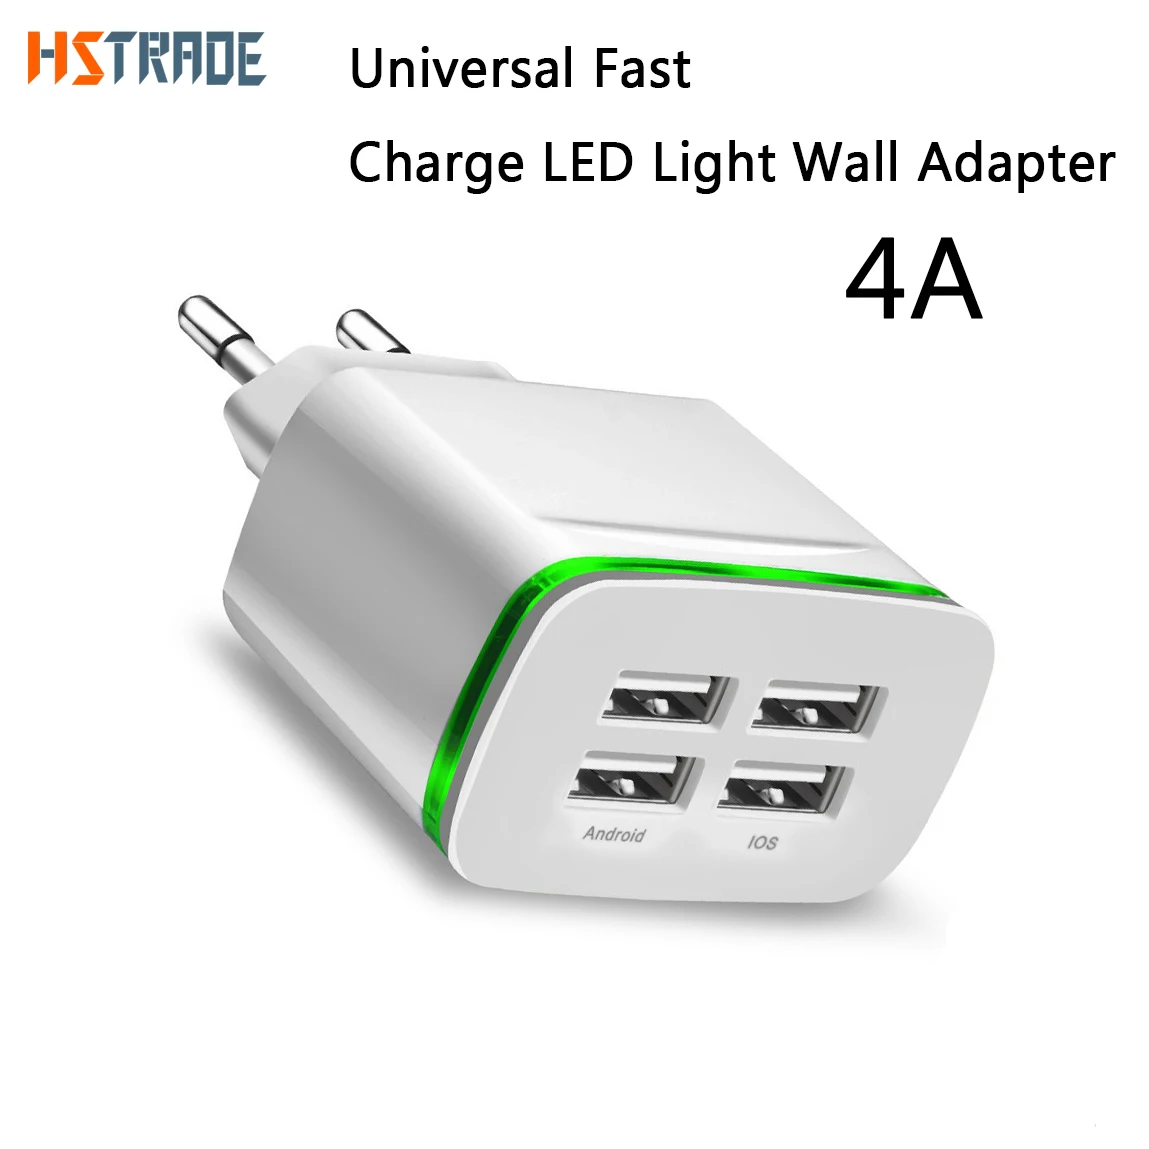 Fast Charge Universal LED Light Wall Adapter 4A Travel charge Plug Multi Port Charger For HUAWEI iPhone Samsung SONY Xiaomi